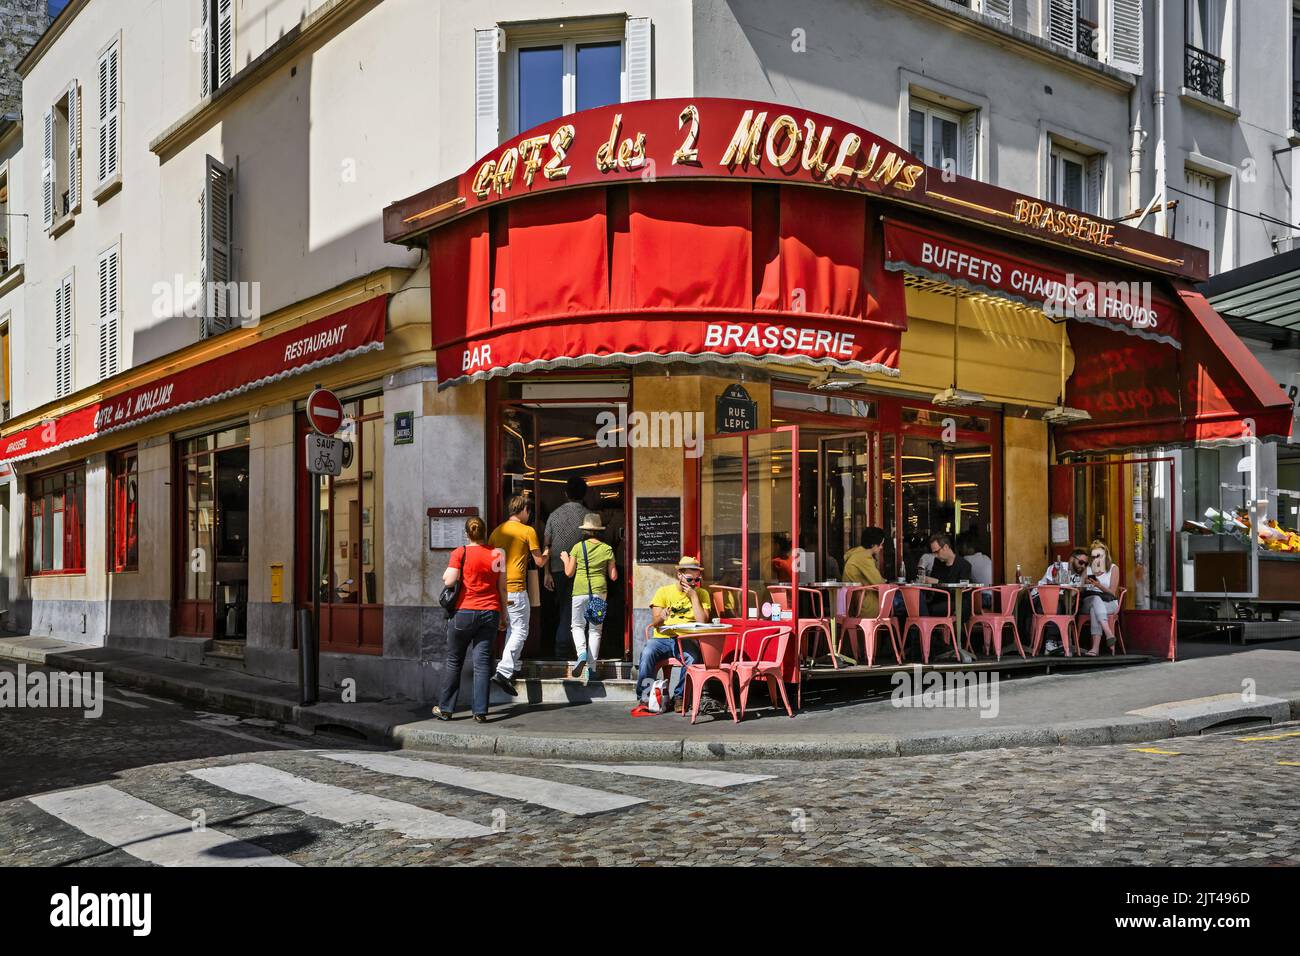 France. Paris (75) 18th district. Montmartre district. Cafe des 2 Moulins (rue Lepic) used as the setting for the famous film The Fabulous Destiny of Stock Photo